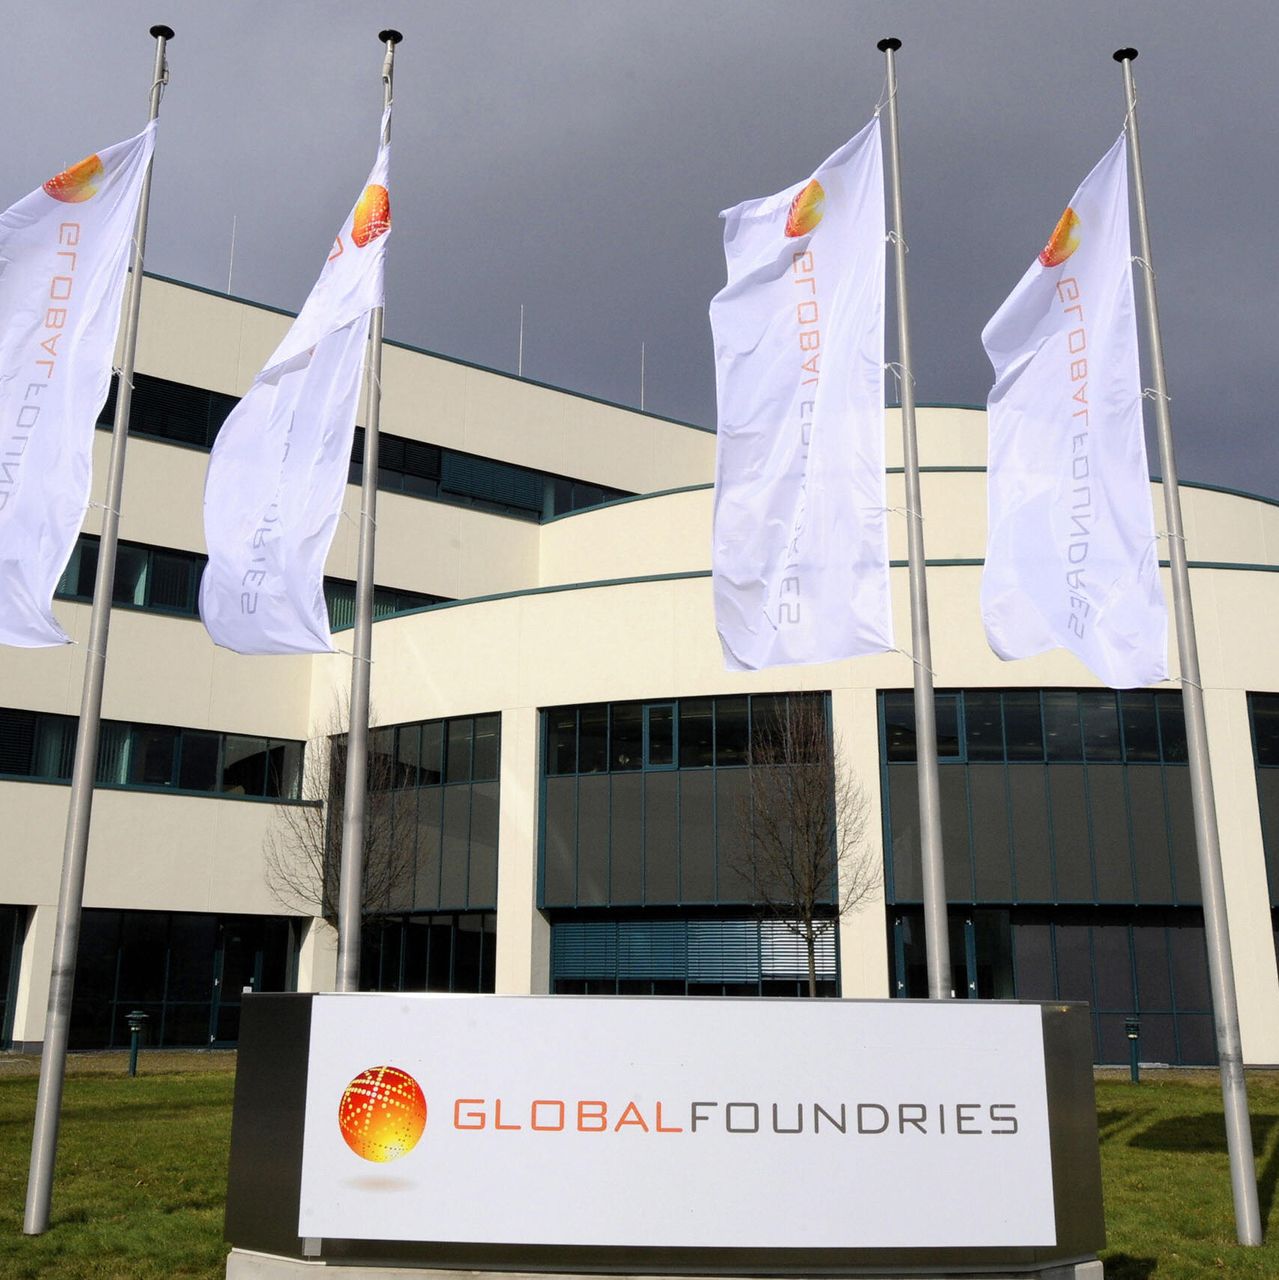 global-foundries